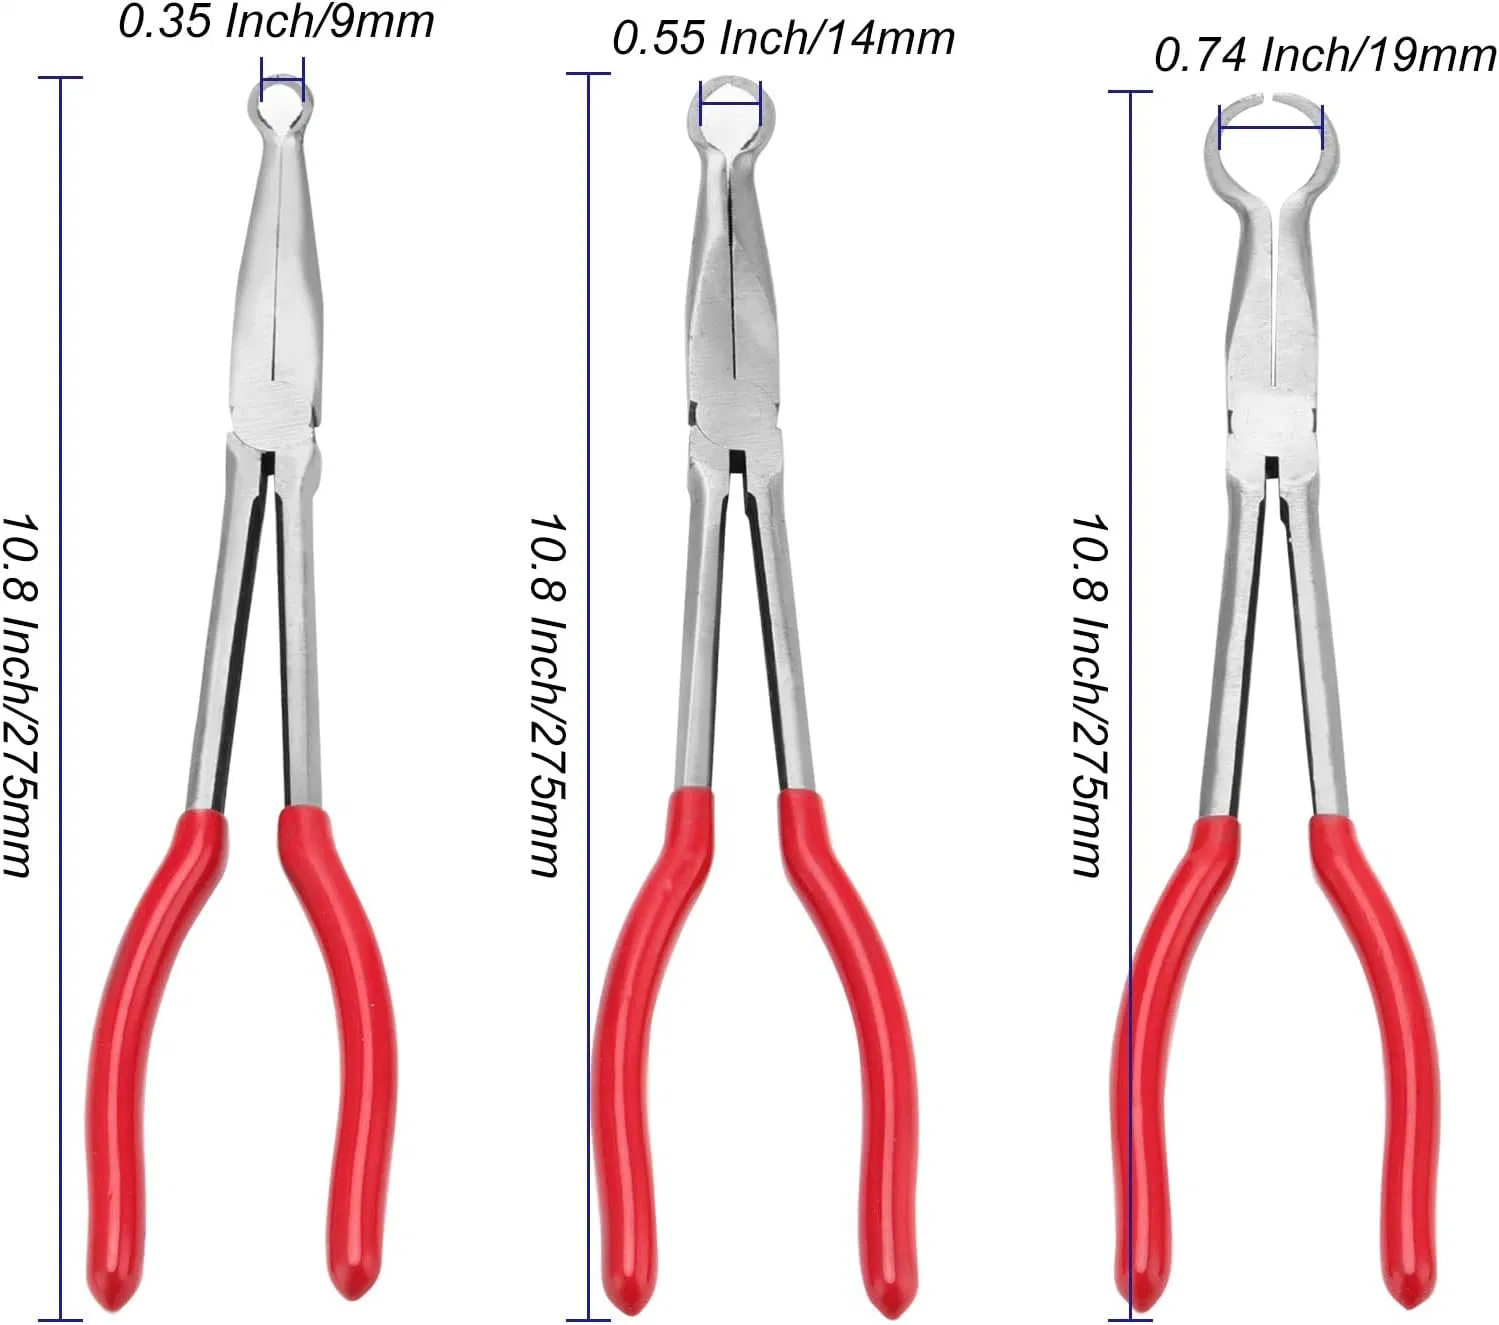 Professional Hand Tools 11 Inch Long Reach Pliers Set for Repairing Electronic Device